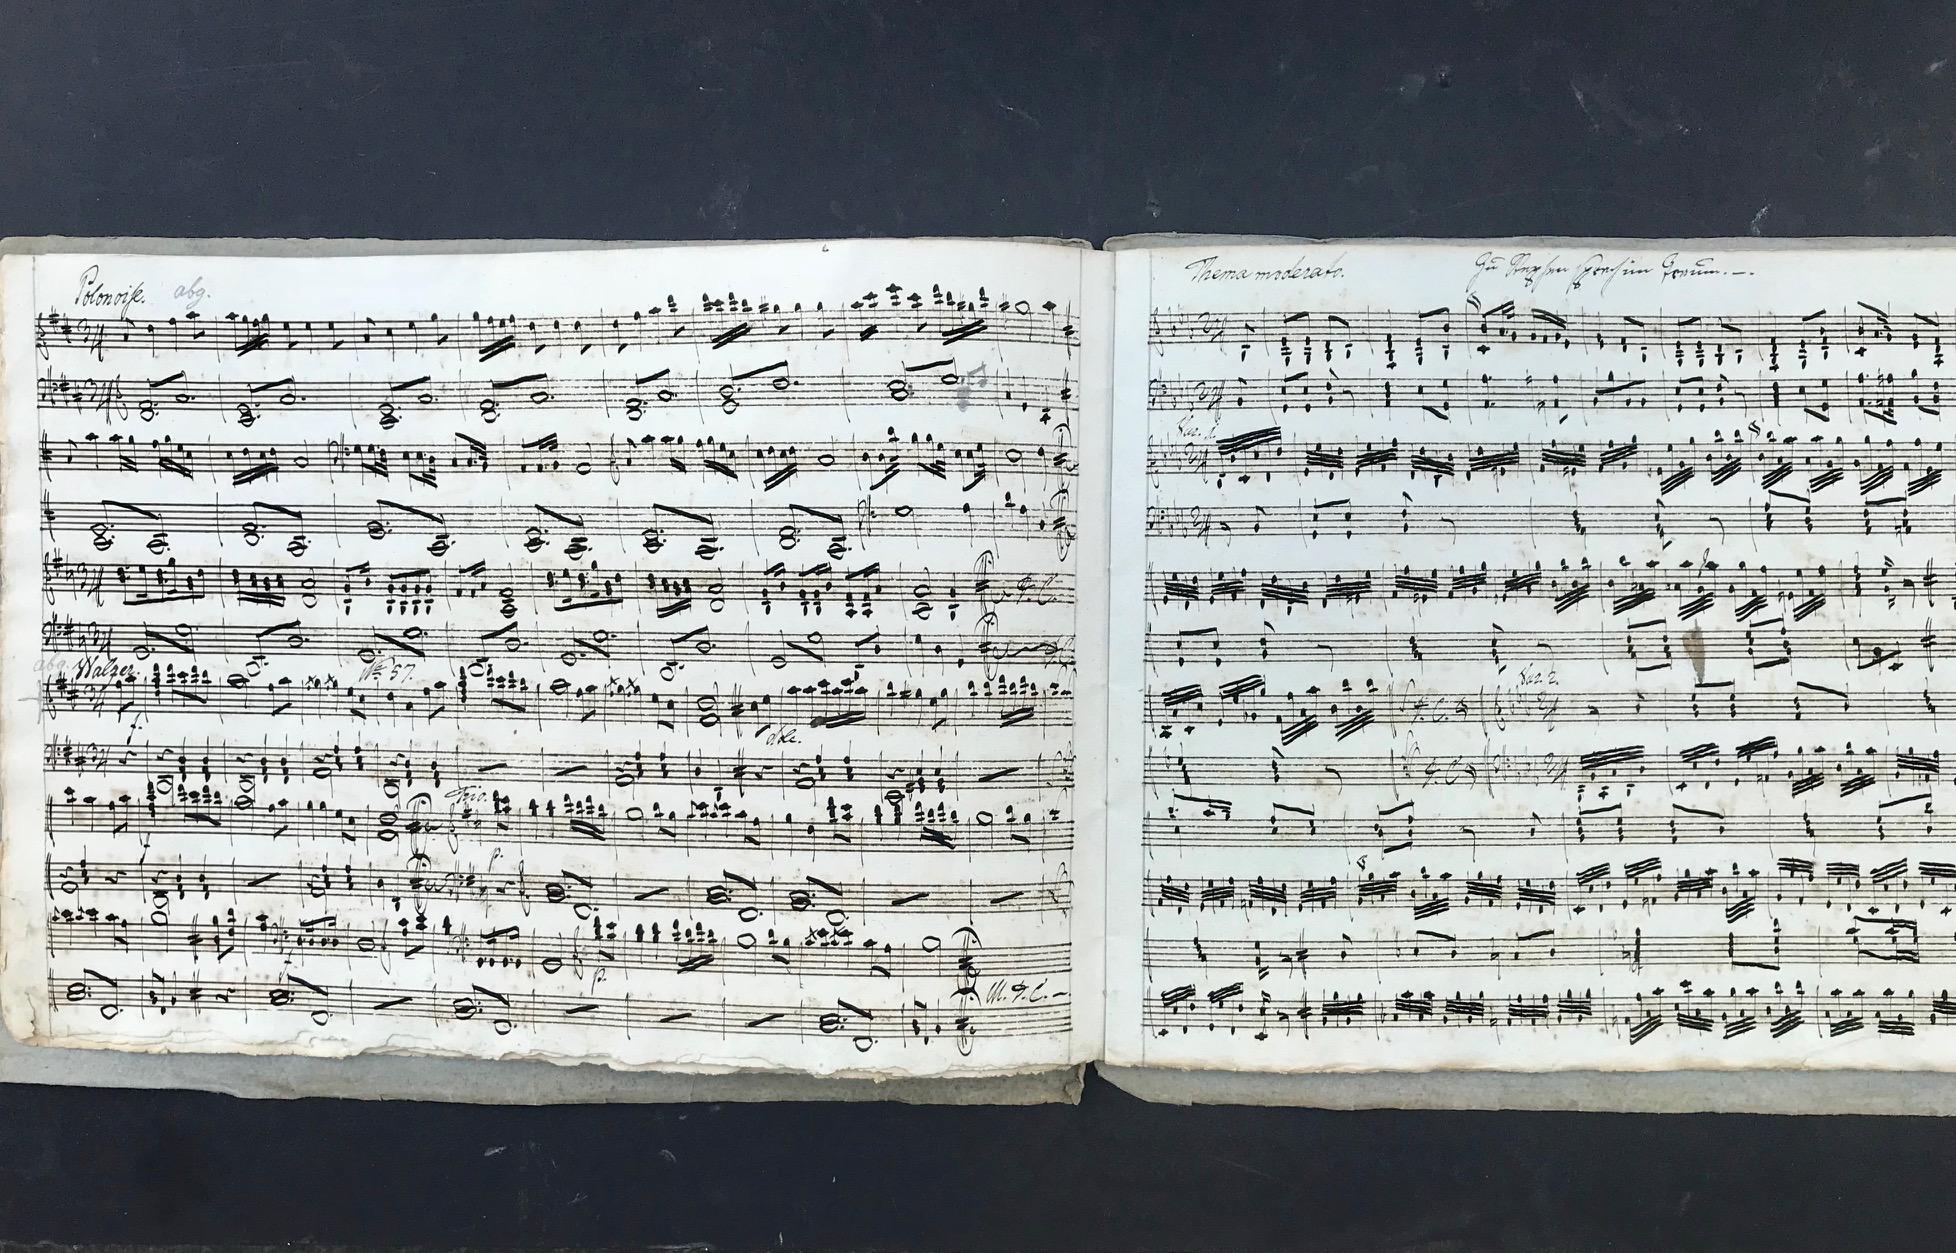 This is an 18th century handwritten musical score of piano compositions by Wolfgang Amadeus Mozart (1761-1791) and Ignaz Pleyel (1757-1831). This music manuscript is a handwritten notation copy in ink on handmade heavy paper by an 18th century